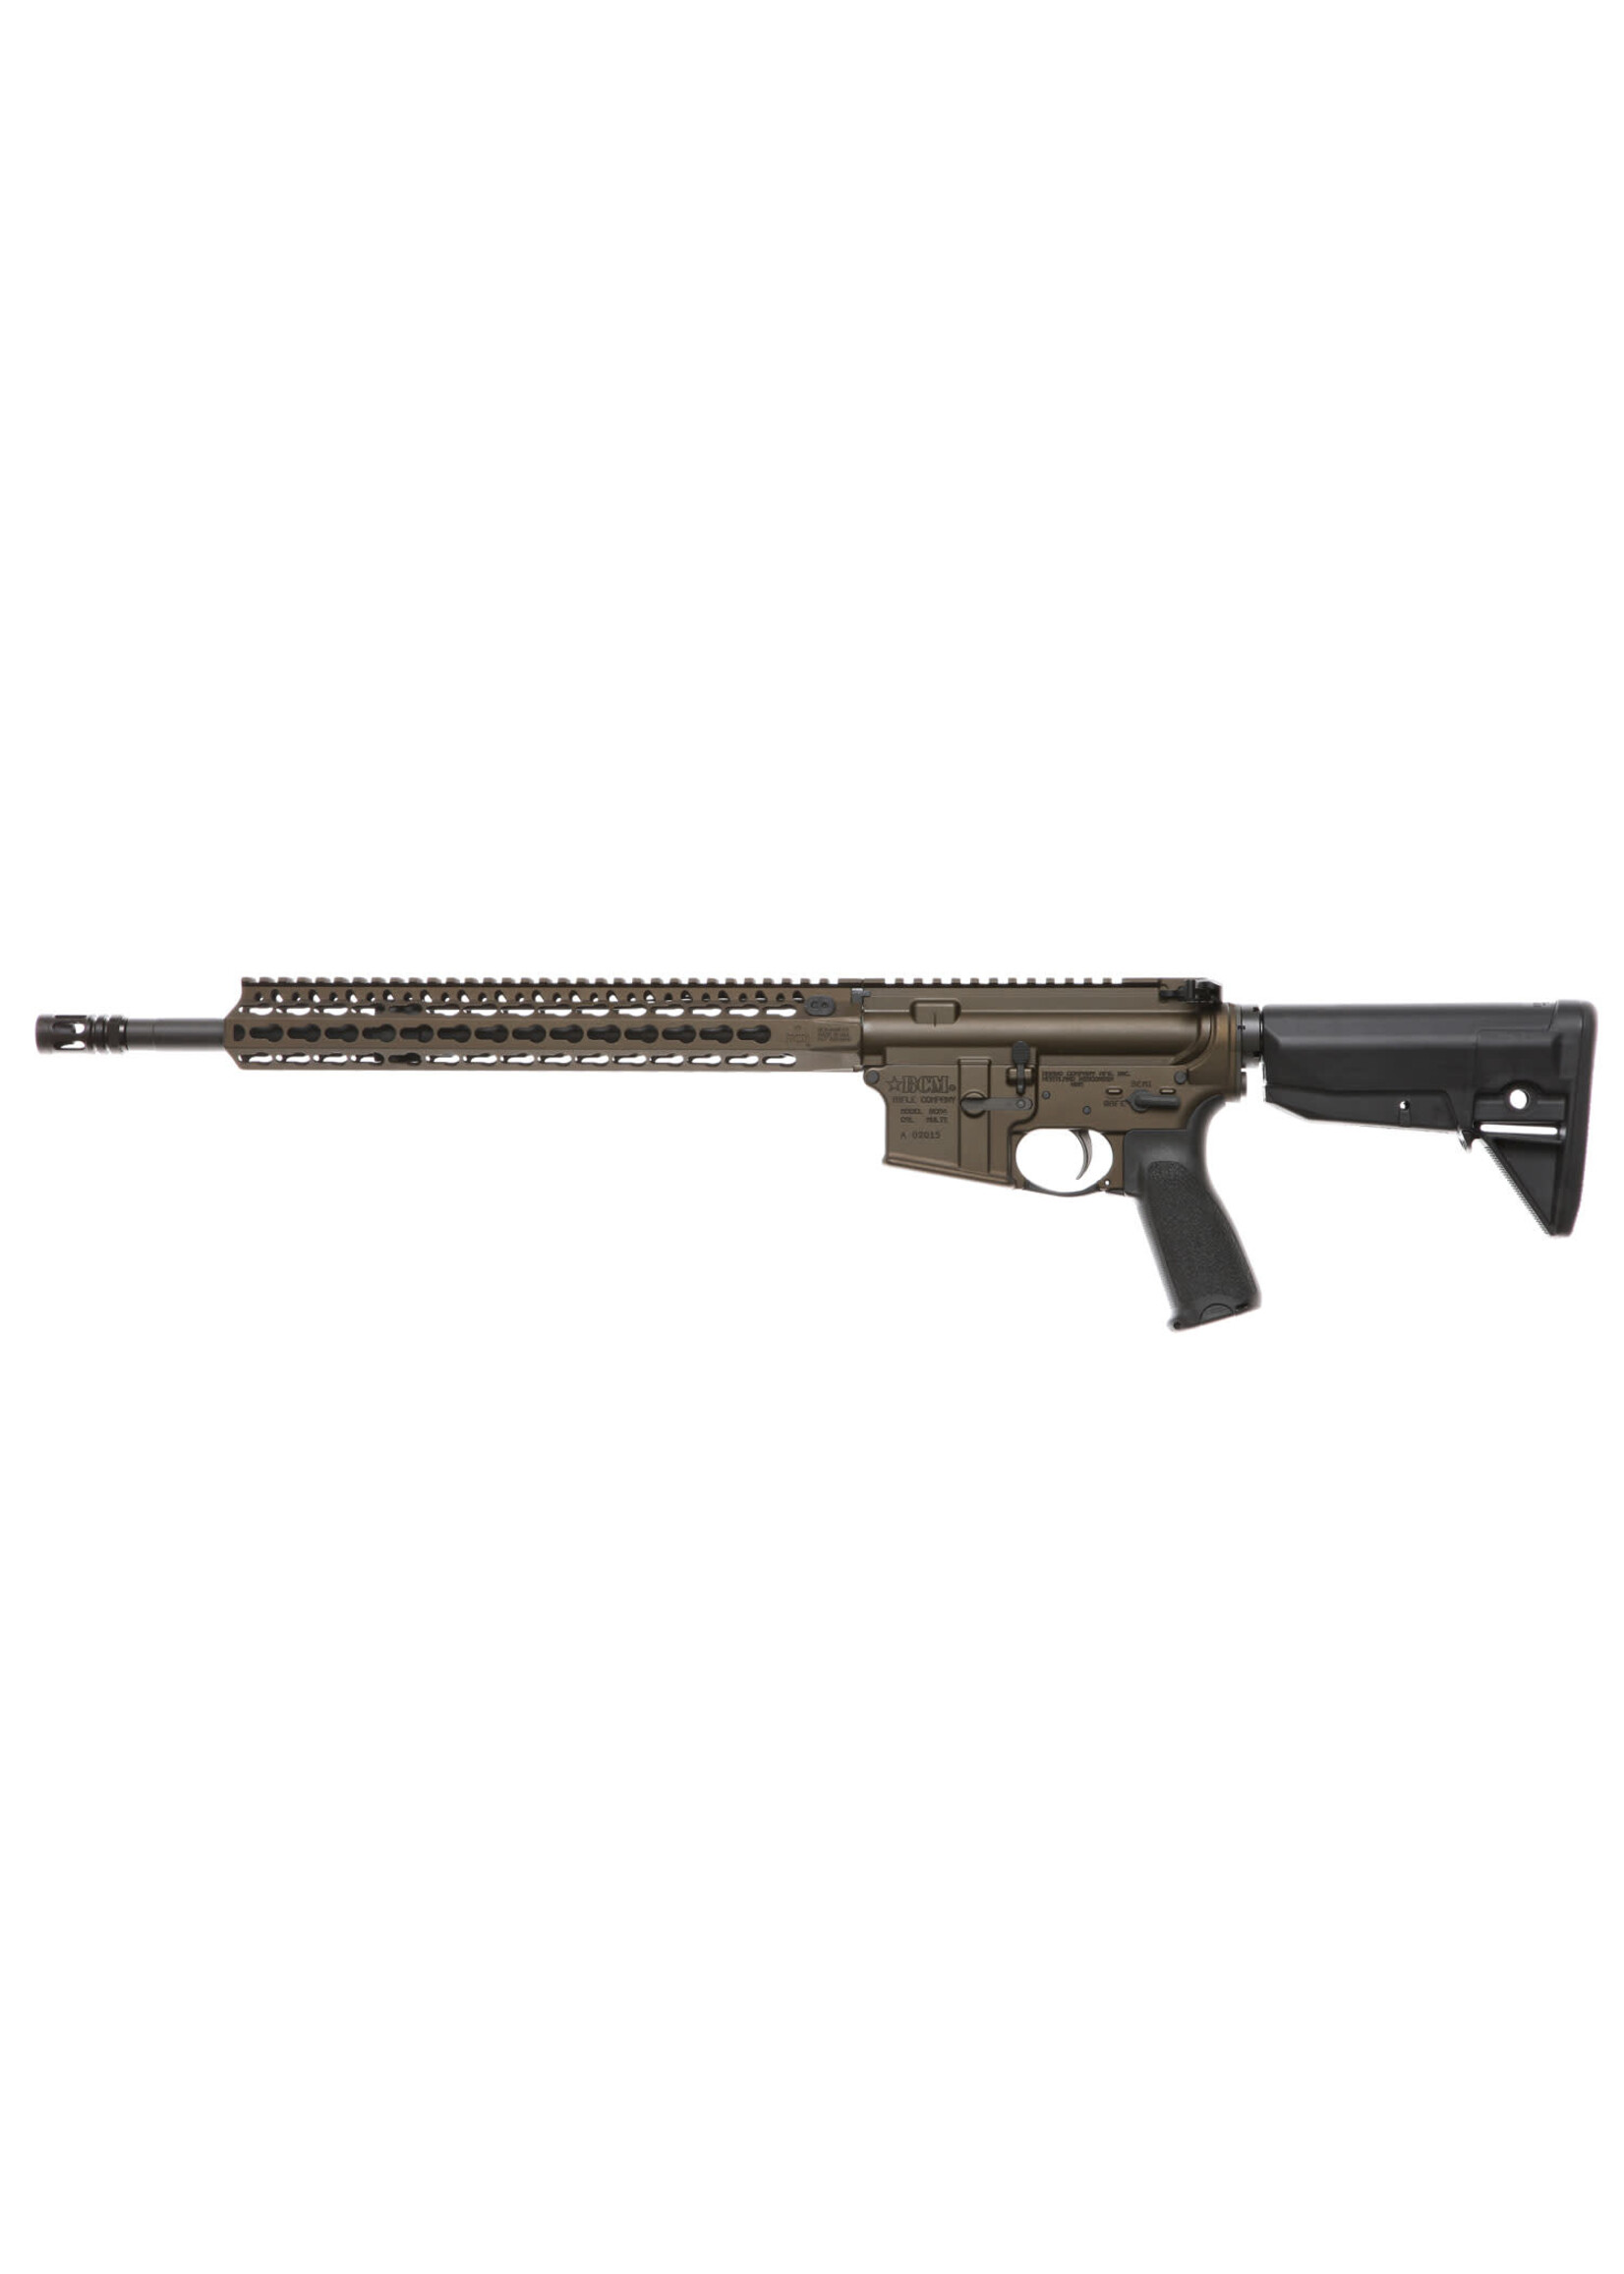 Bravo Company Mfg SPECIAL ORDER BCM 750790BRZ RECCE-16 KMR-A 223 Rem/5.56x45mm NATO 30+1 16" Government Profile Steel Barrel, Mod 0 Compensator, Bronze Cerakote Finished 7075-T6 Receiver, Synthetic 6 Position Stock, Bravo Mod 3 Grip, Ambidextrous Safety